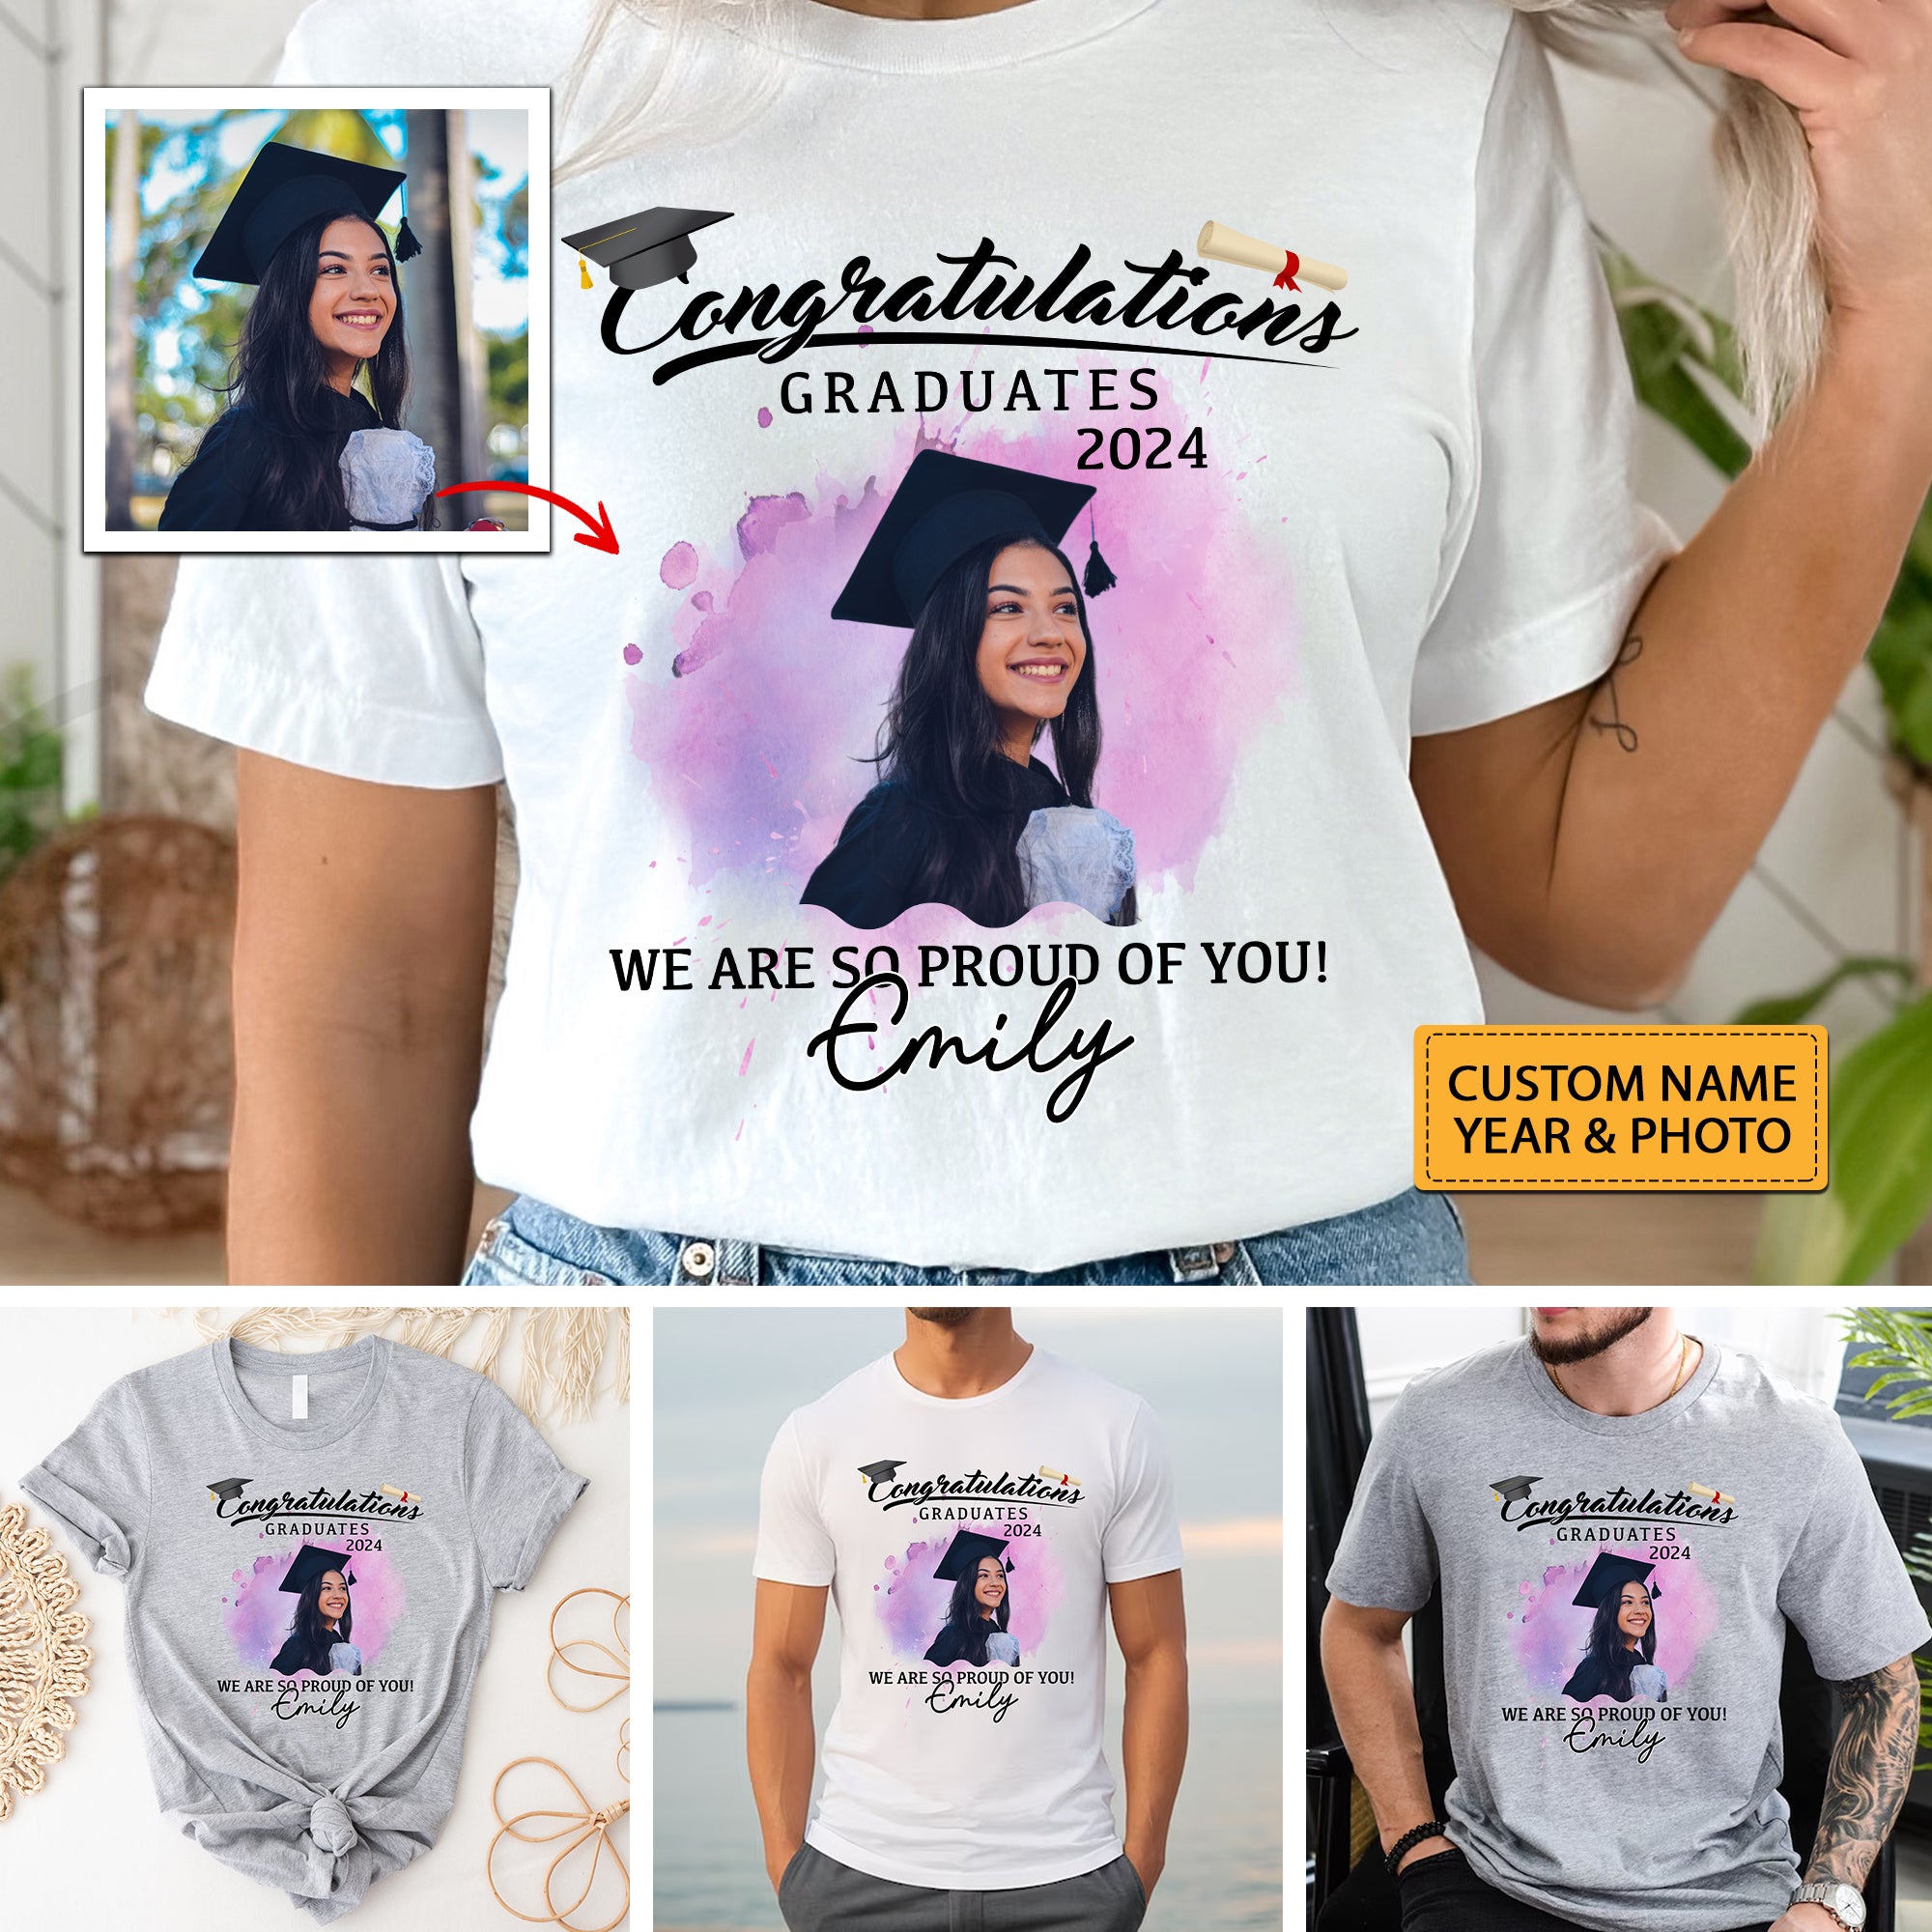 Congratulations Graduated We Proud Of You, Custom Photo And Texts - Gift For Graduation - Personalized Shirt